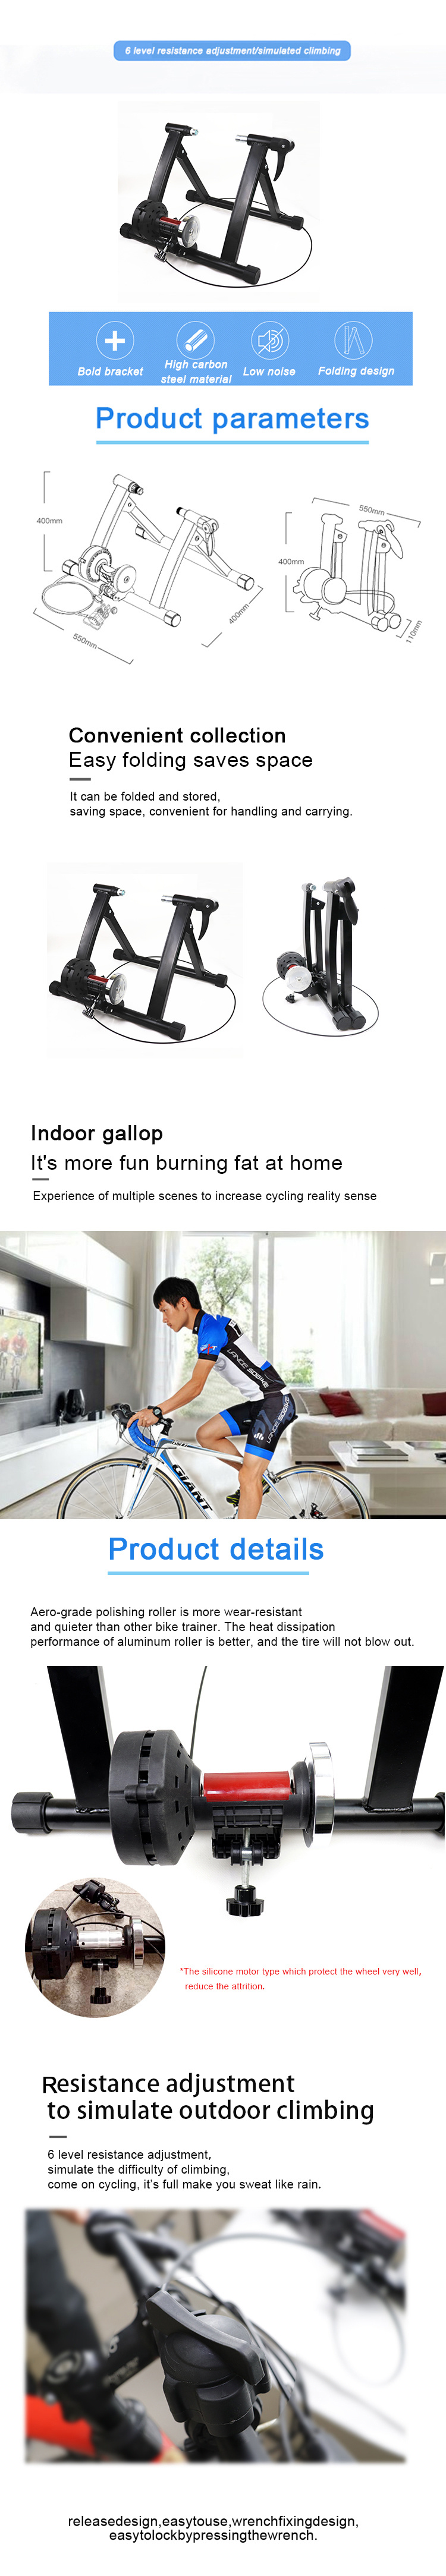 Foldable Gym Equipment Bicycle Home Exercise